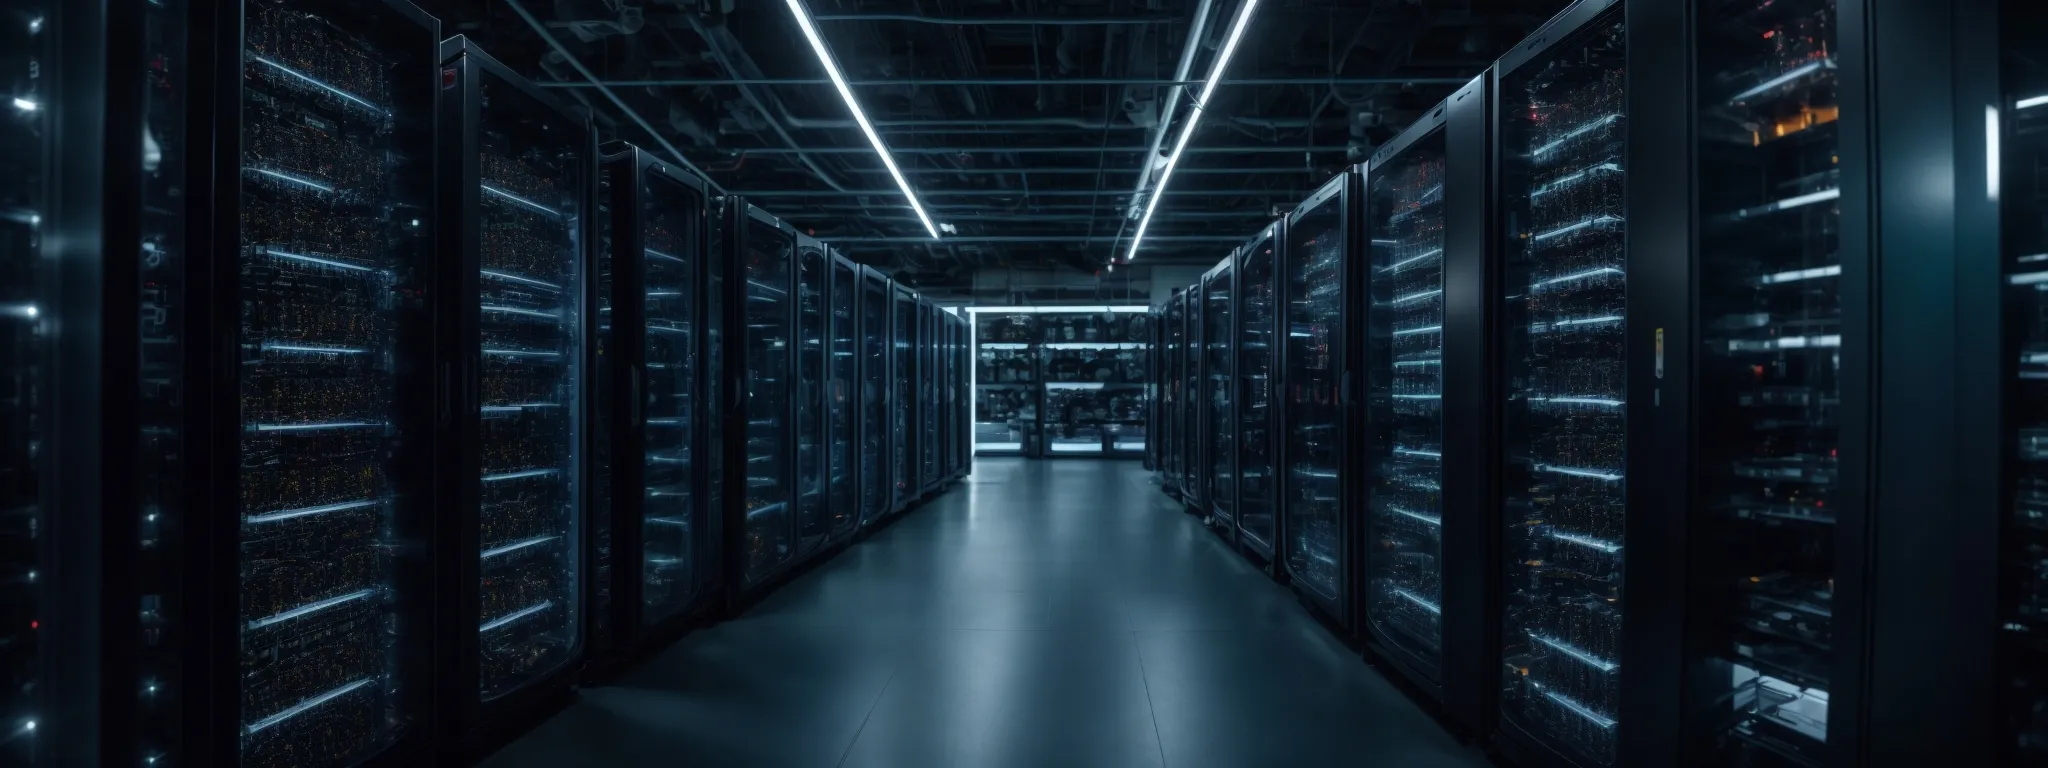 a panoramic view of servers and data centers symbolizing the computational power behind machine learning advancements in search technology.